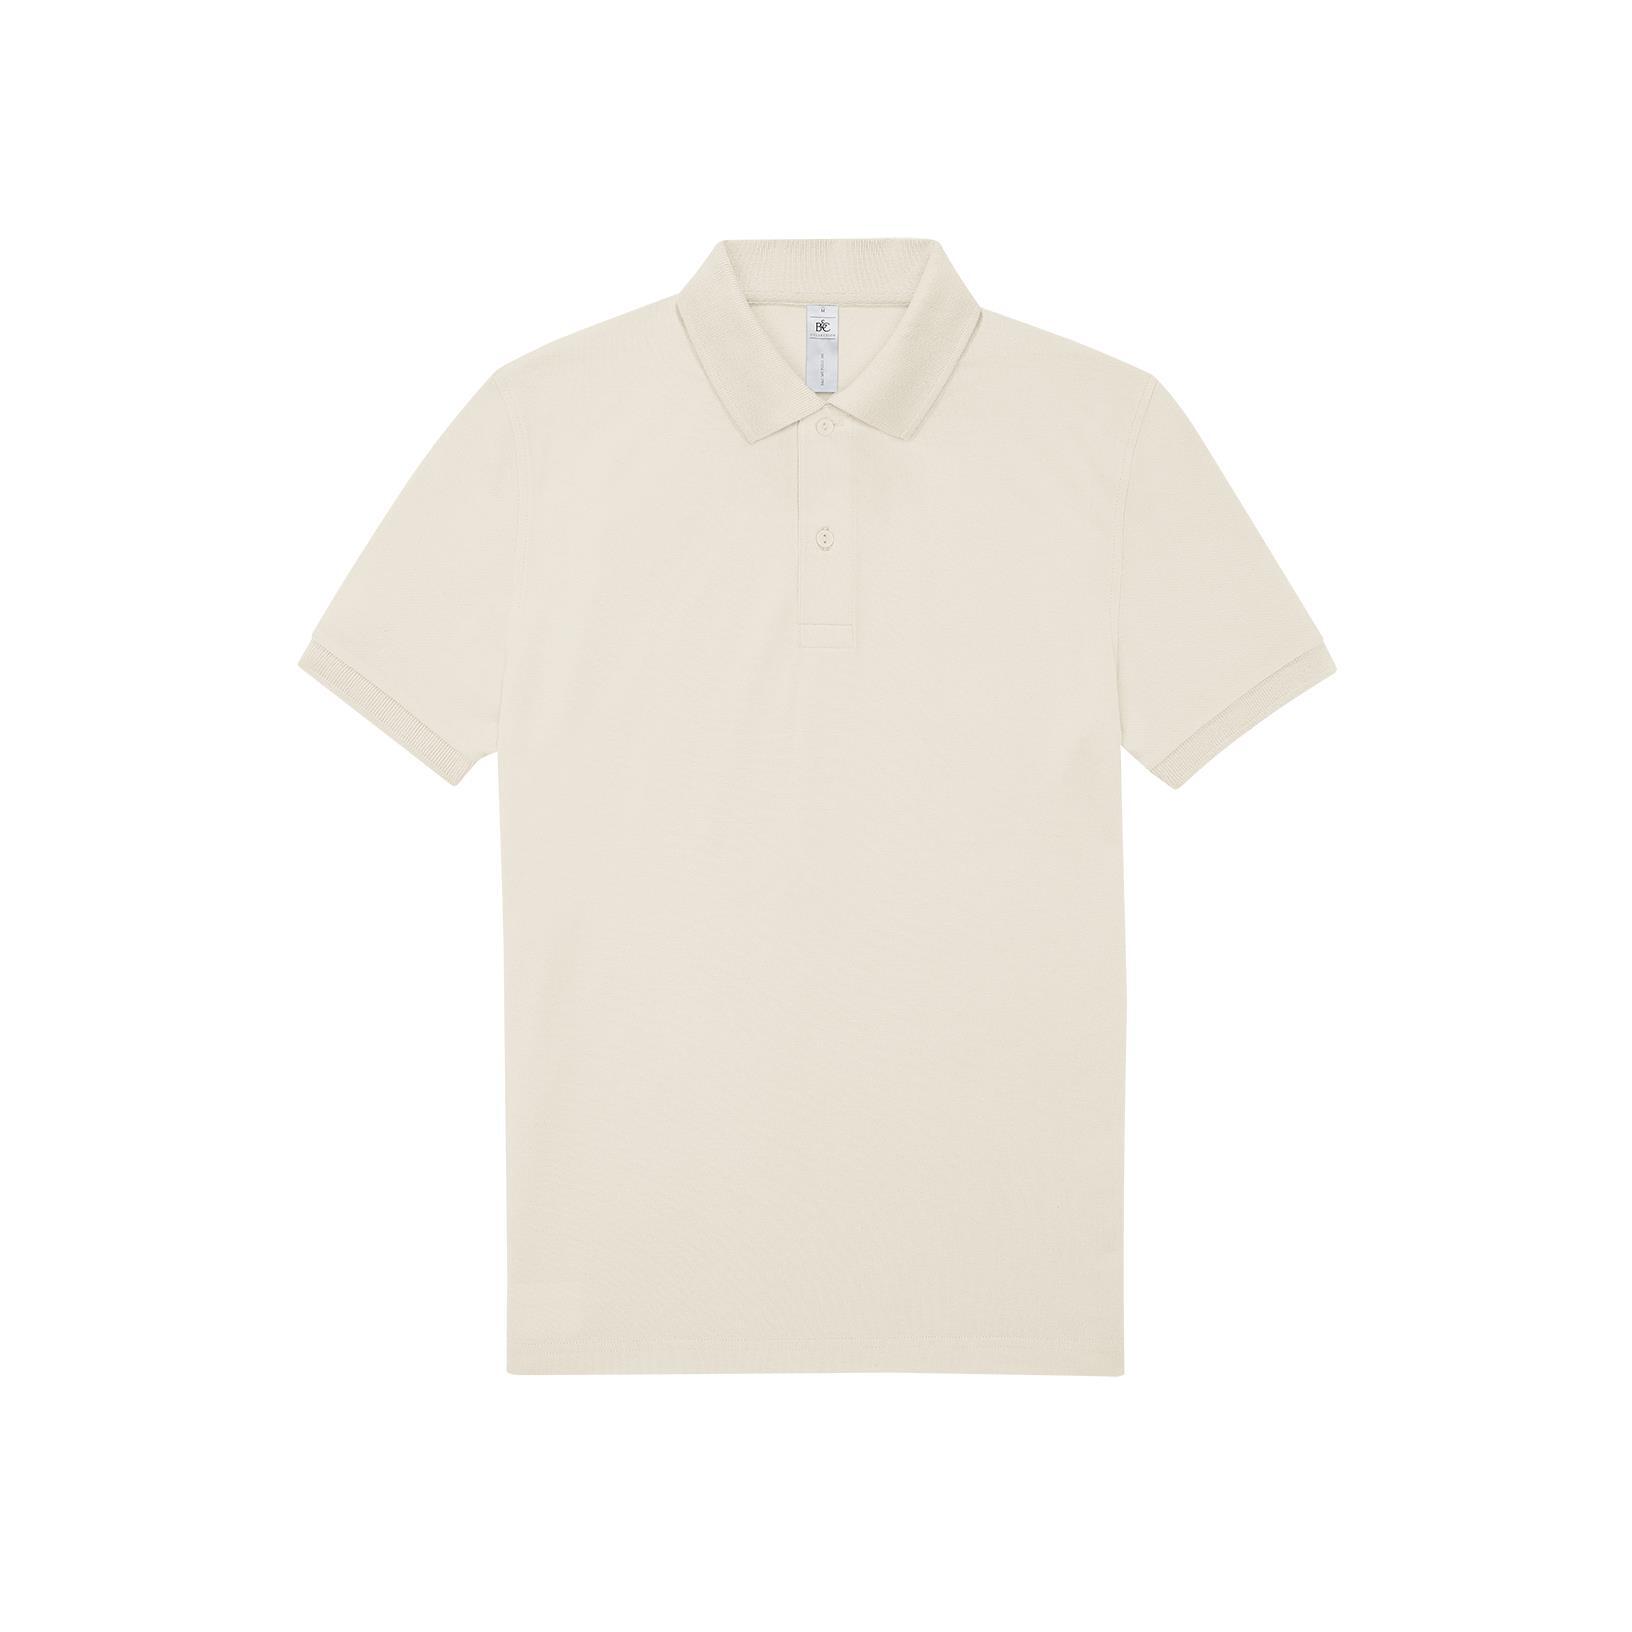 Polo voor mannen off wit moderne polo